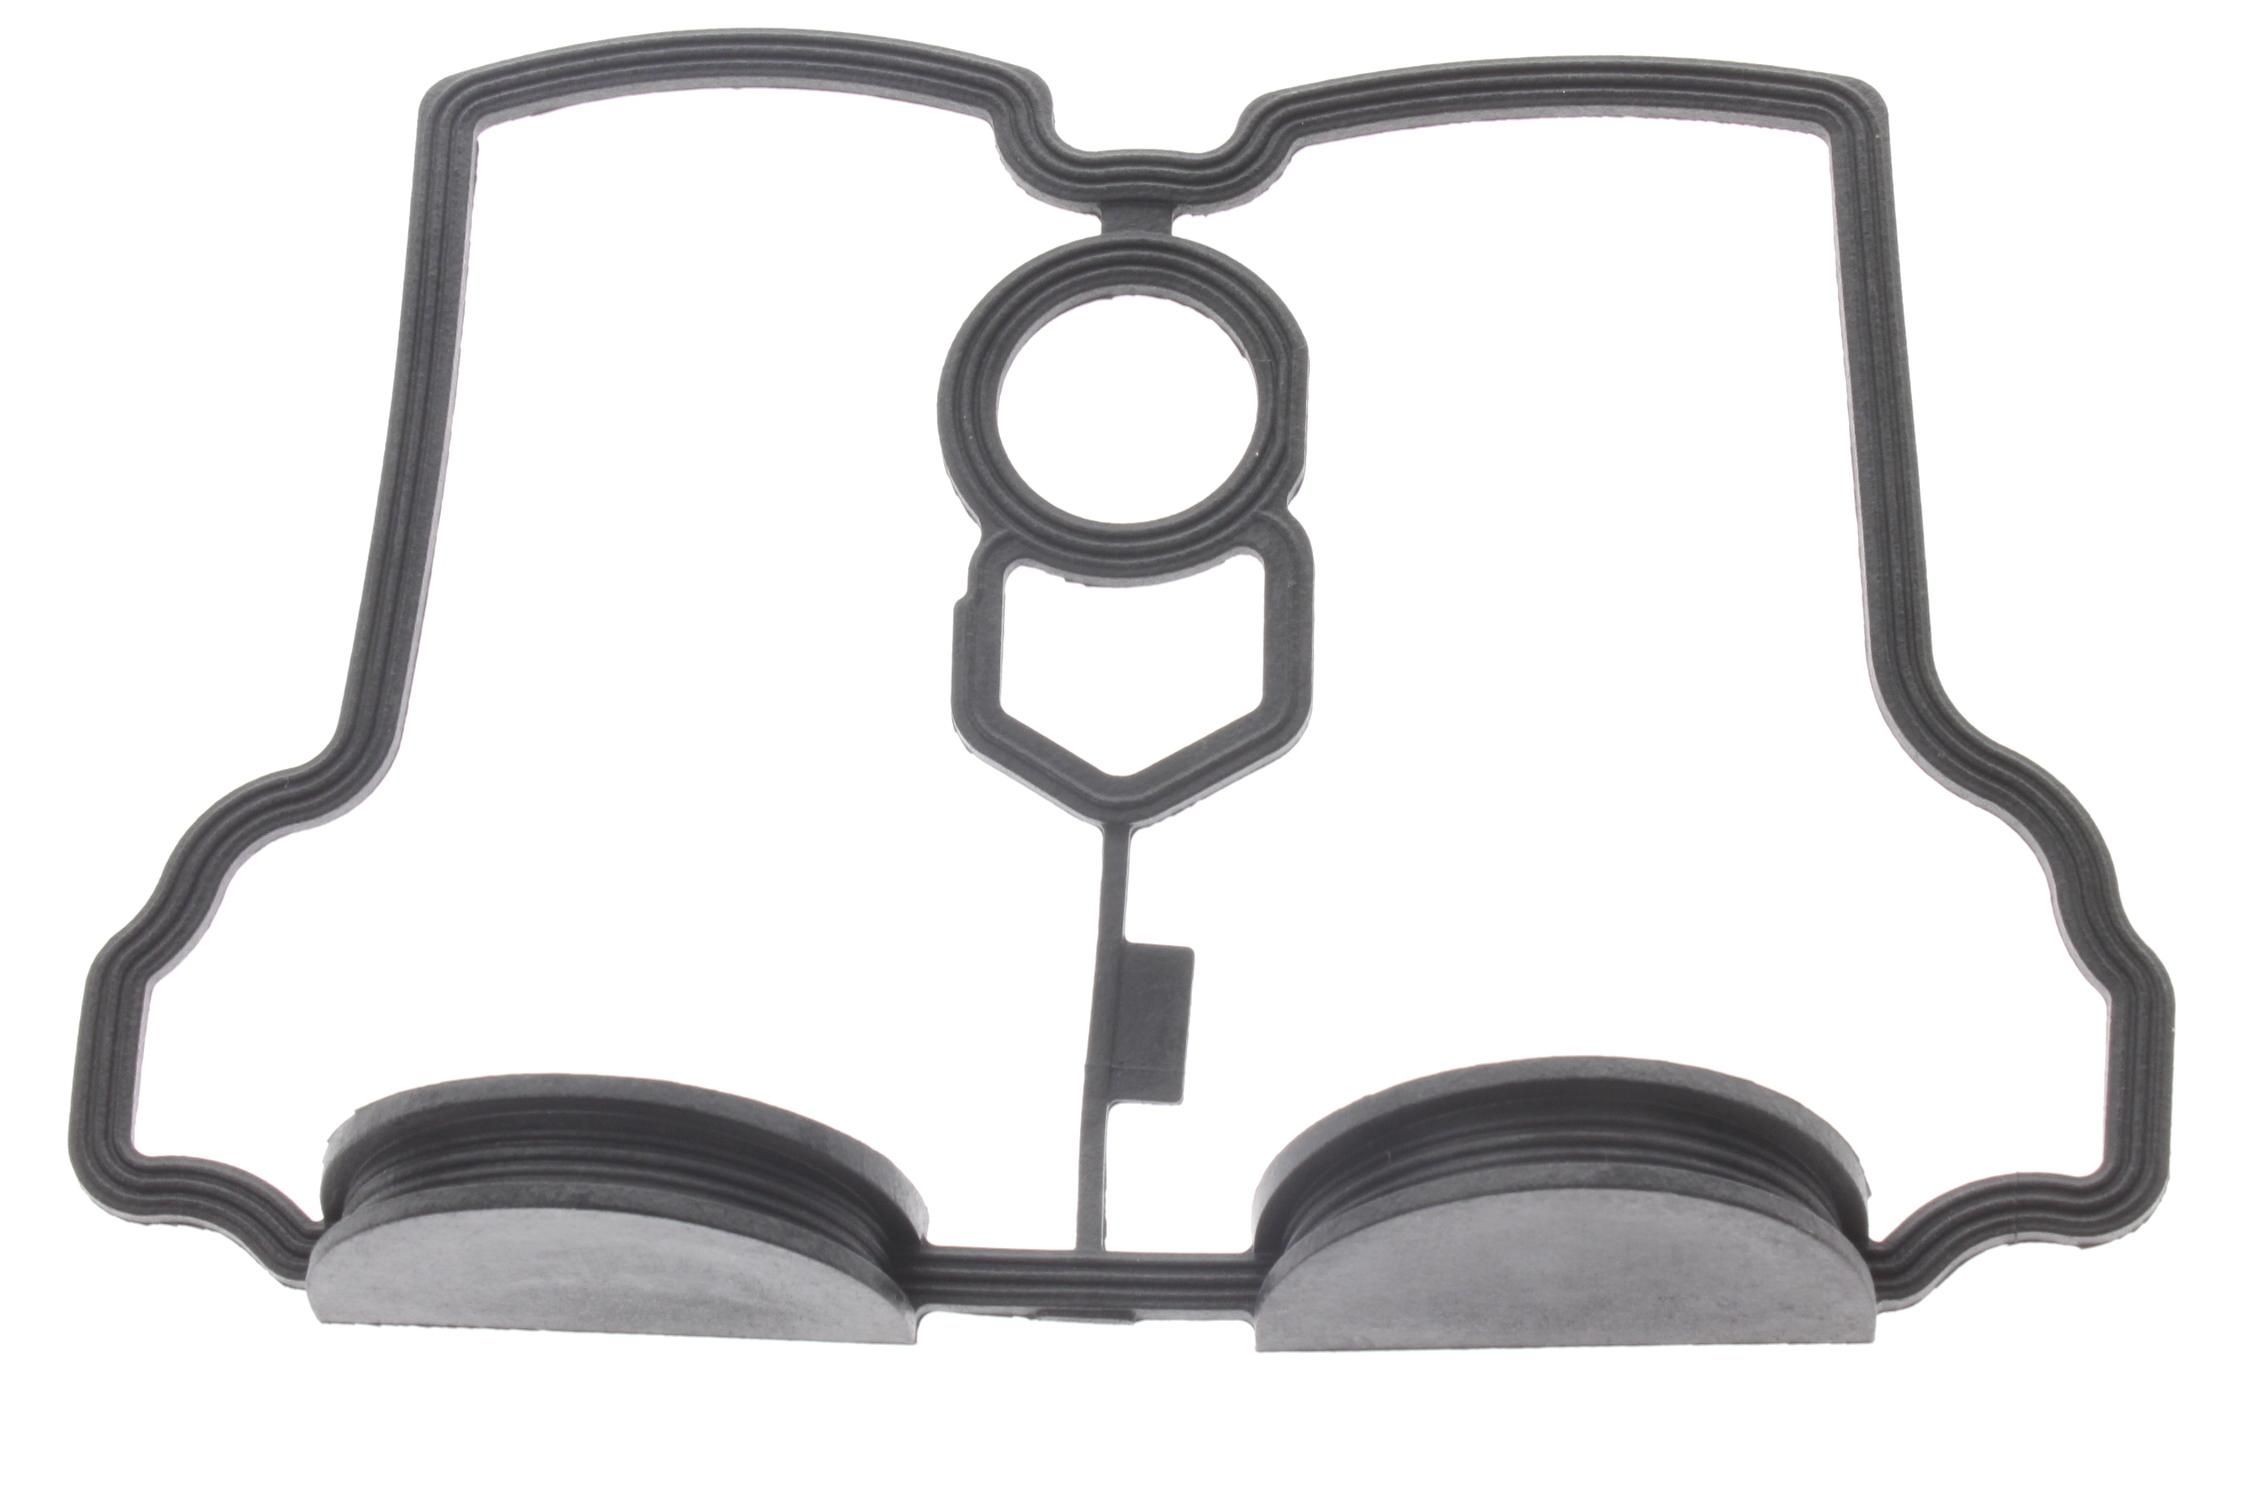 5NL-11193-00-00 HEAD COVER GASKET